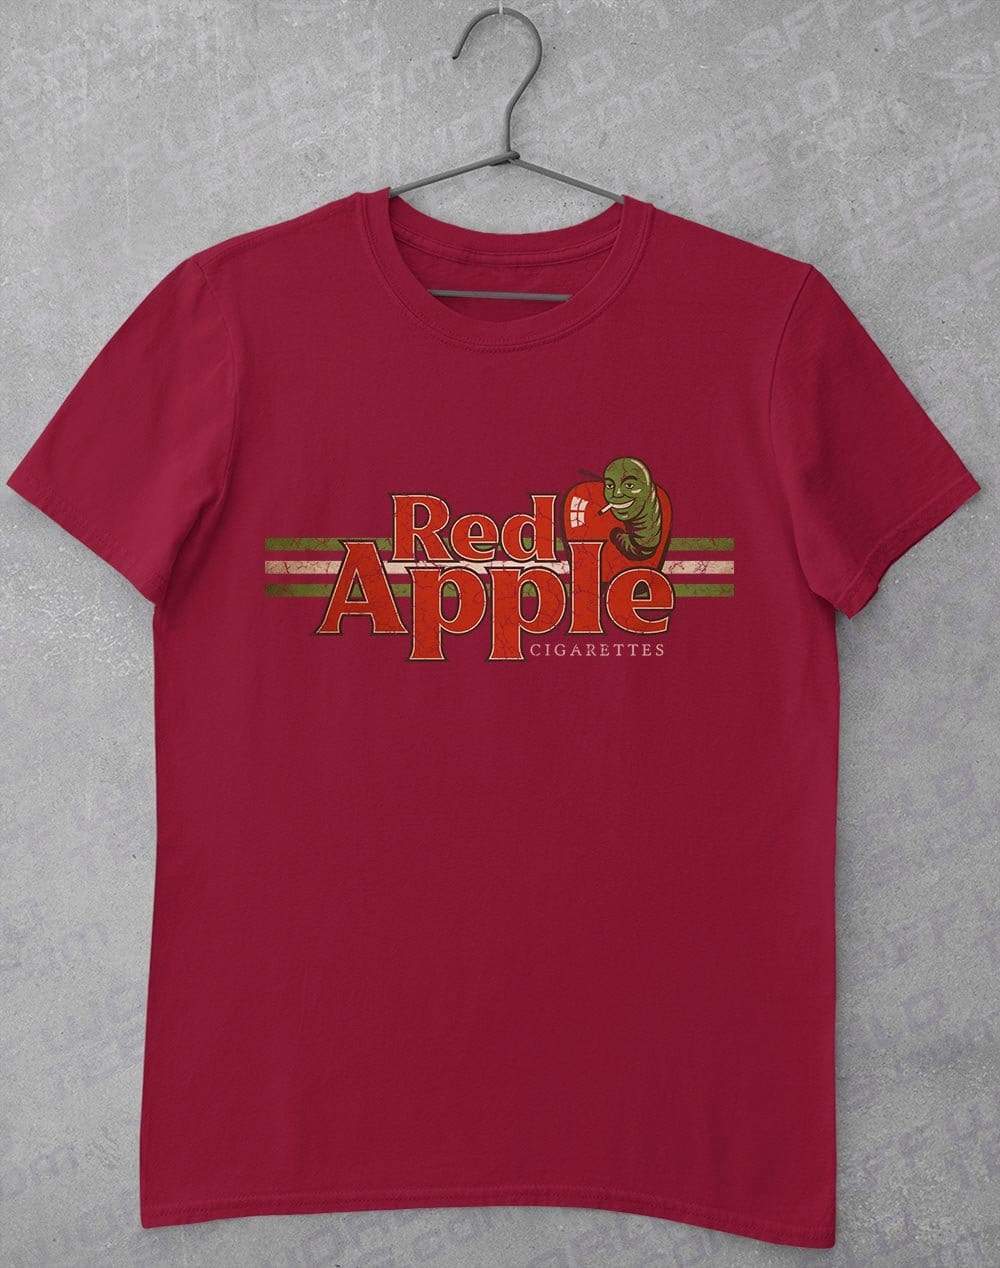 Red Apple Cigarettes T-Shirt S / Cardinal Red  - Off World Tees